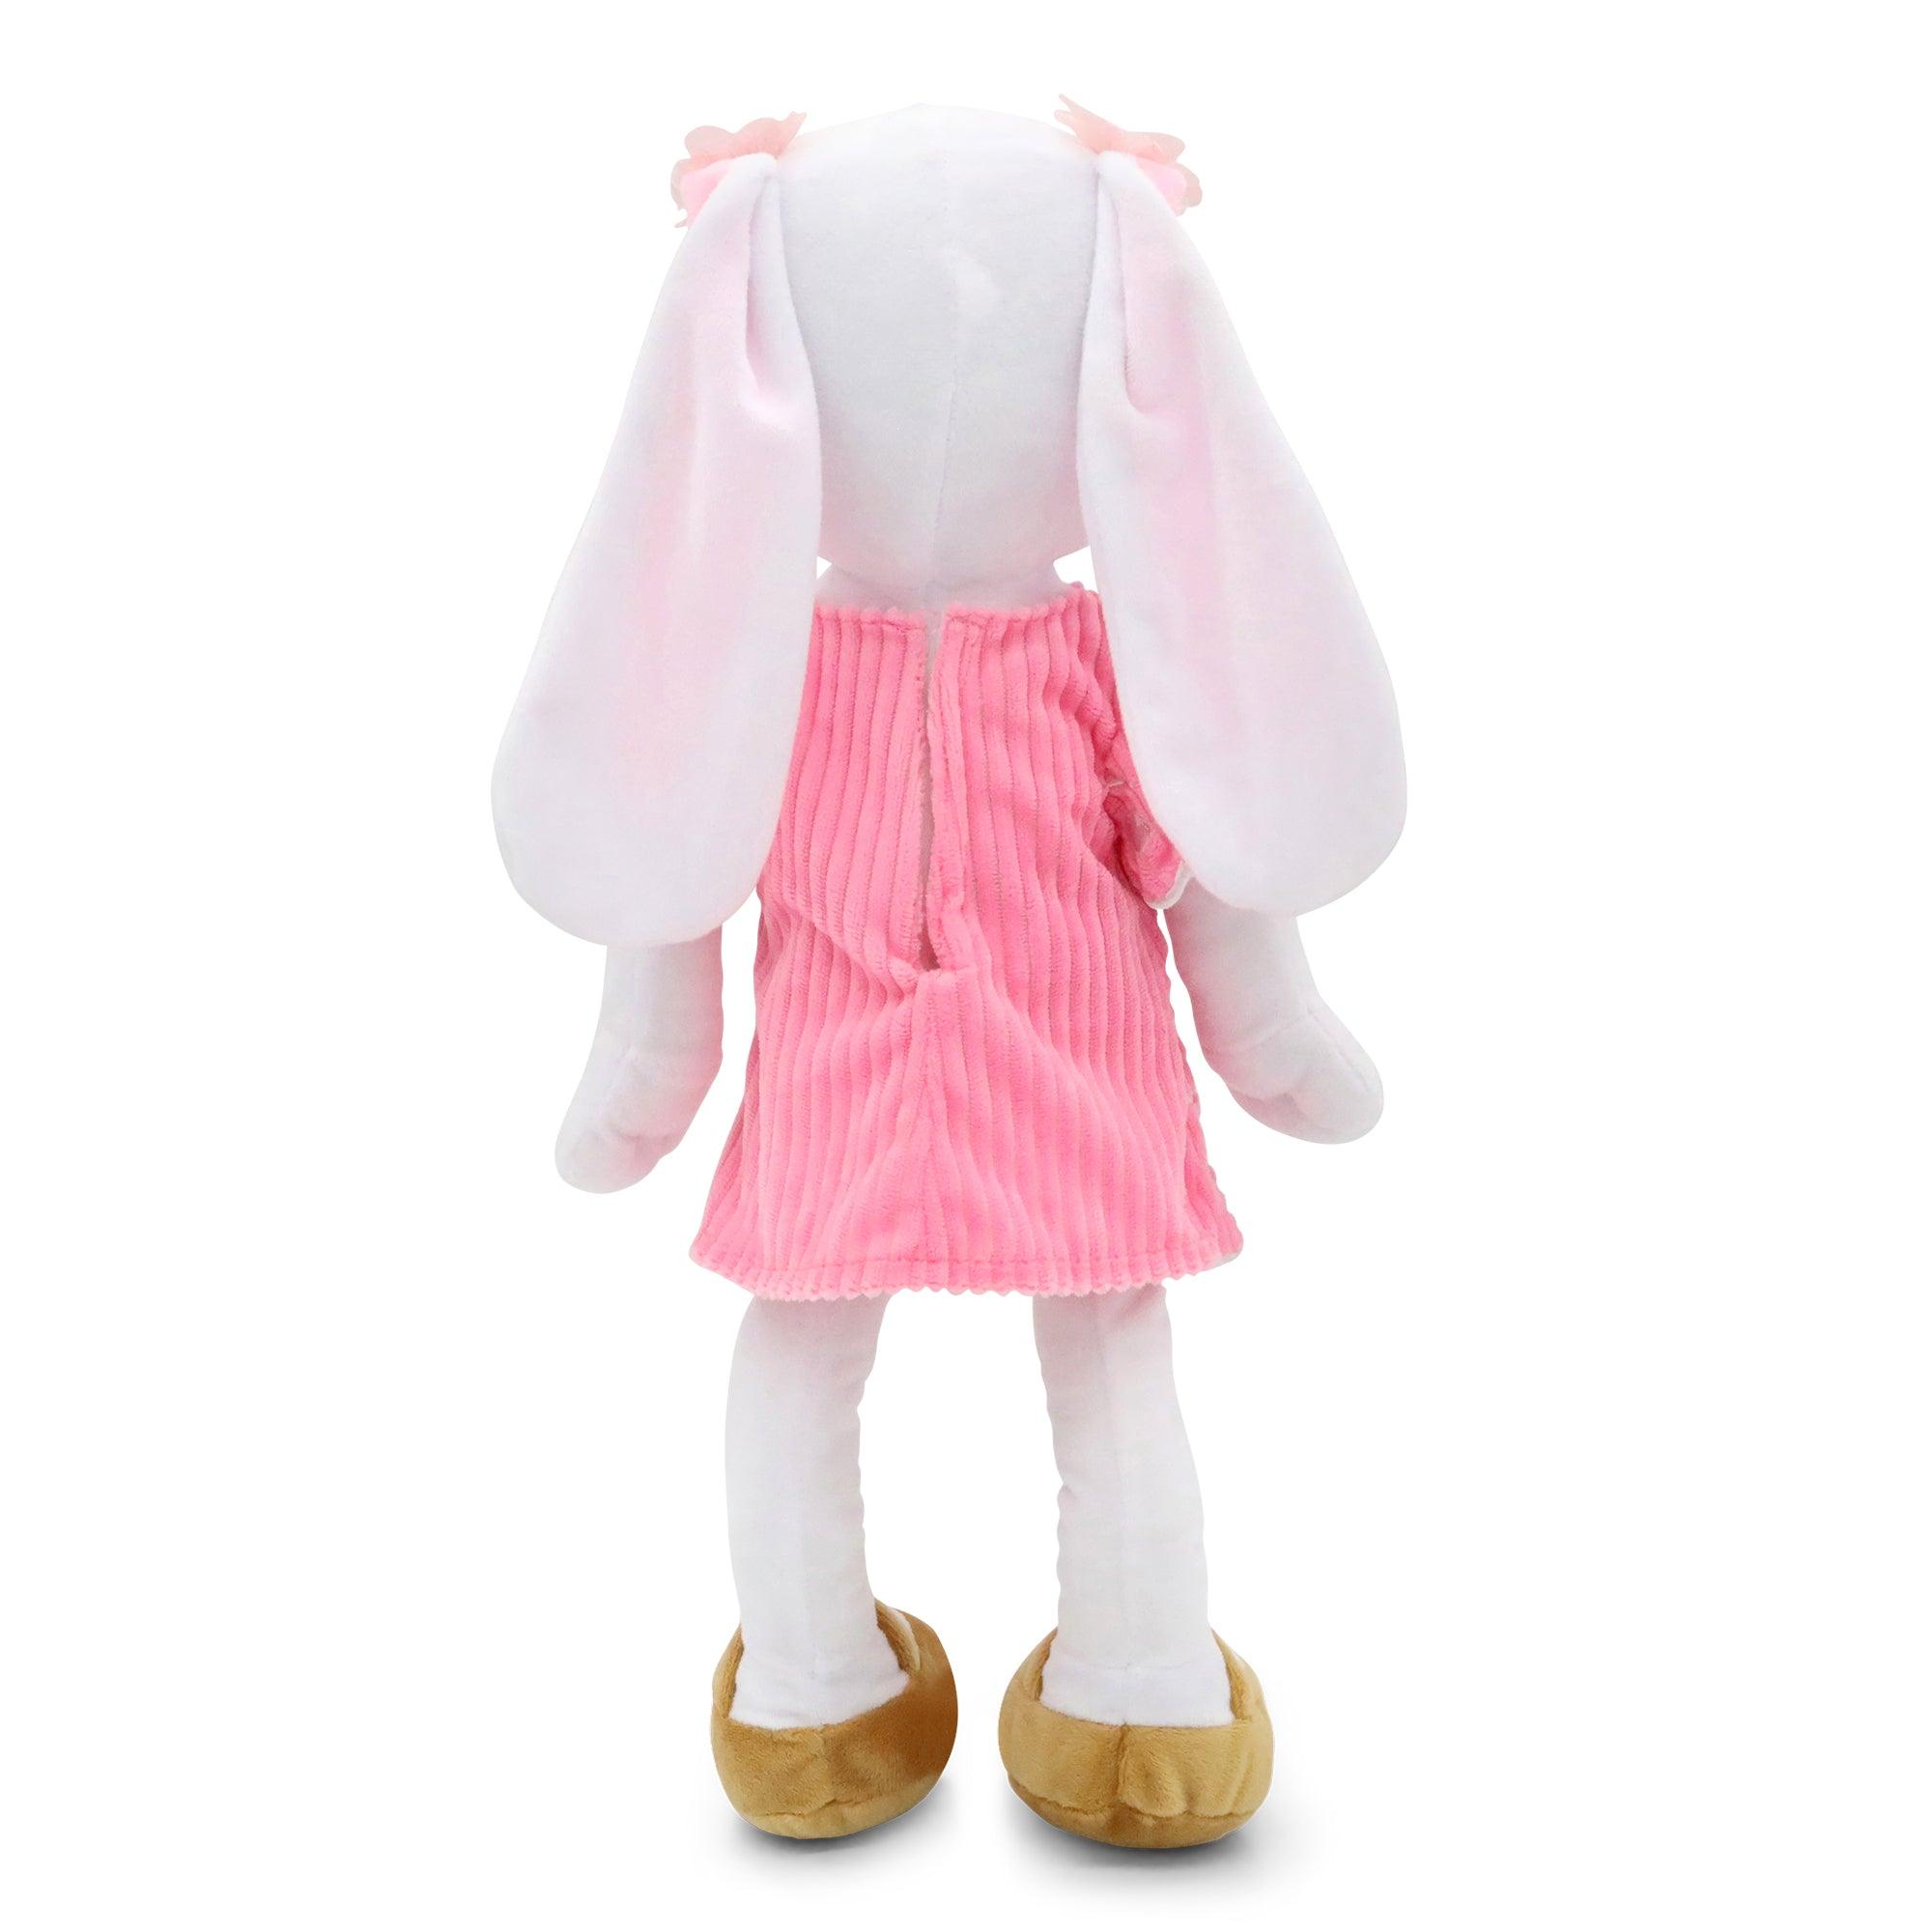 Sharewood Forest Friends 18 Inch Rag Doll Brie the Bunny - OrangeOnions Wholesale